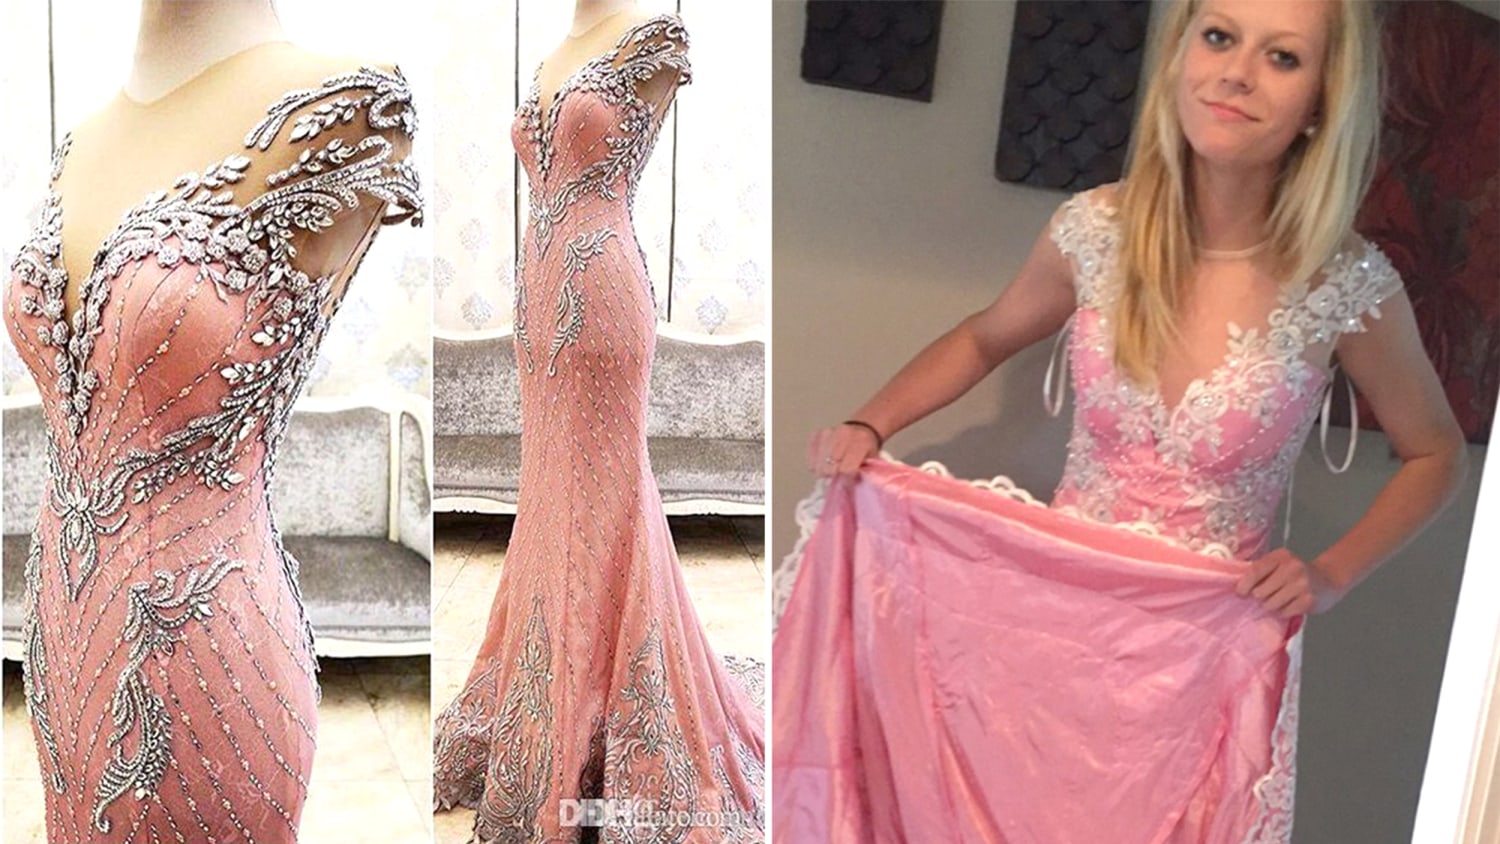 Teen scammed buying prom dress online ...